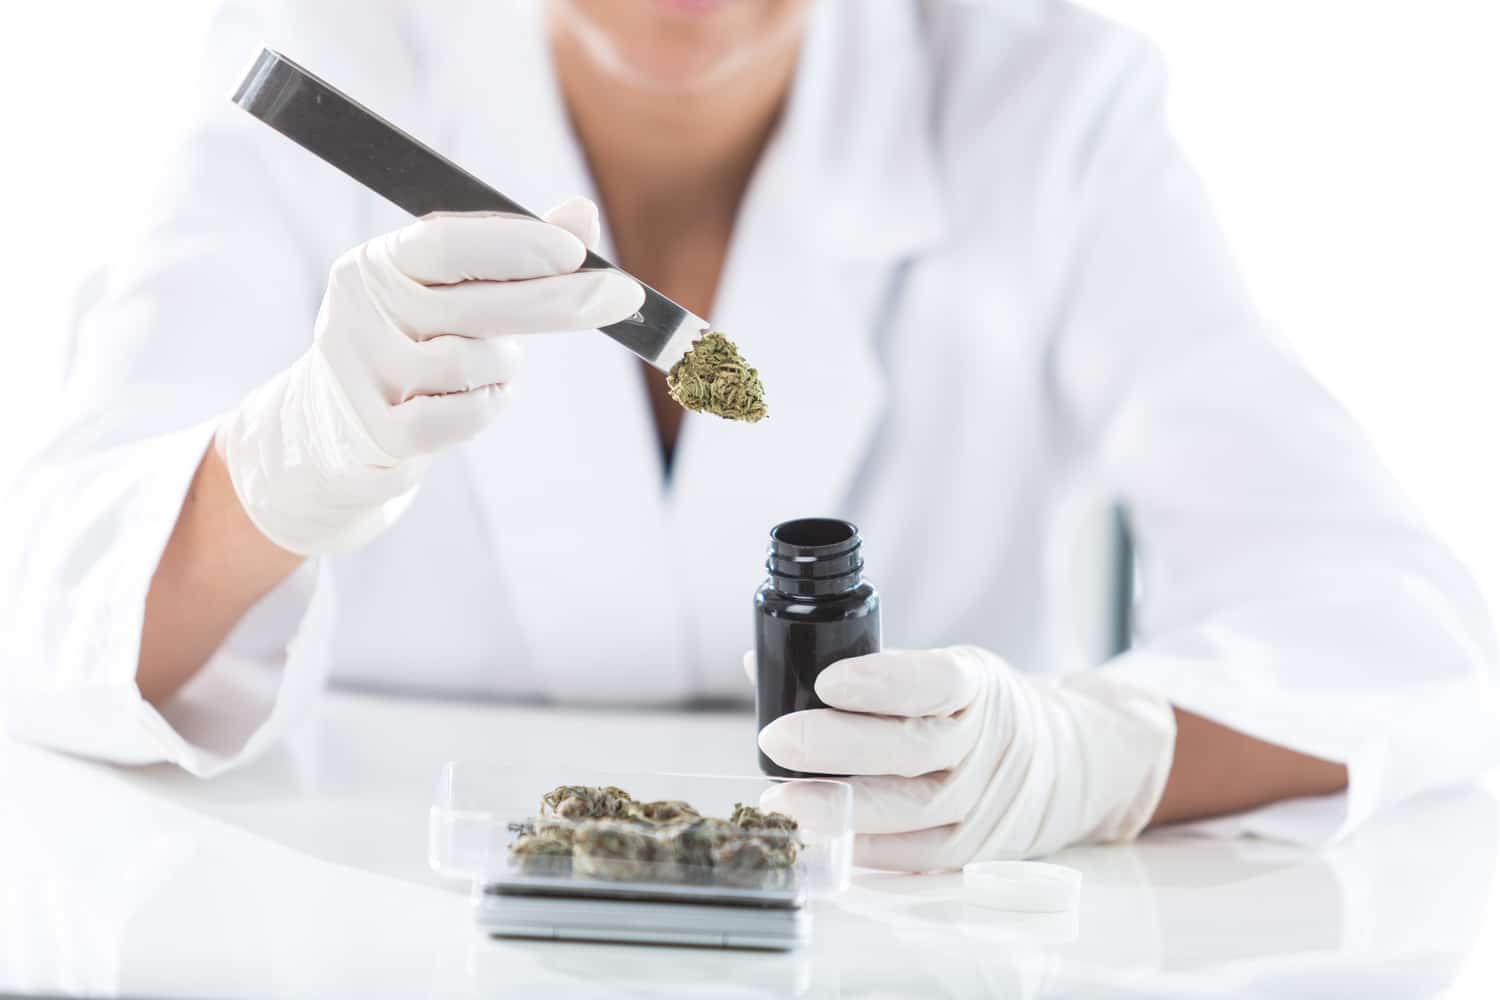 Doctor weighing cannabis